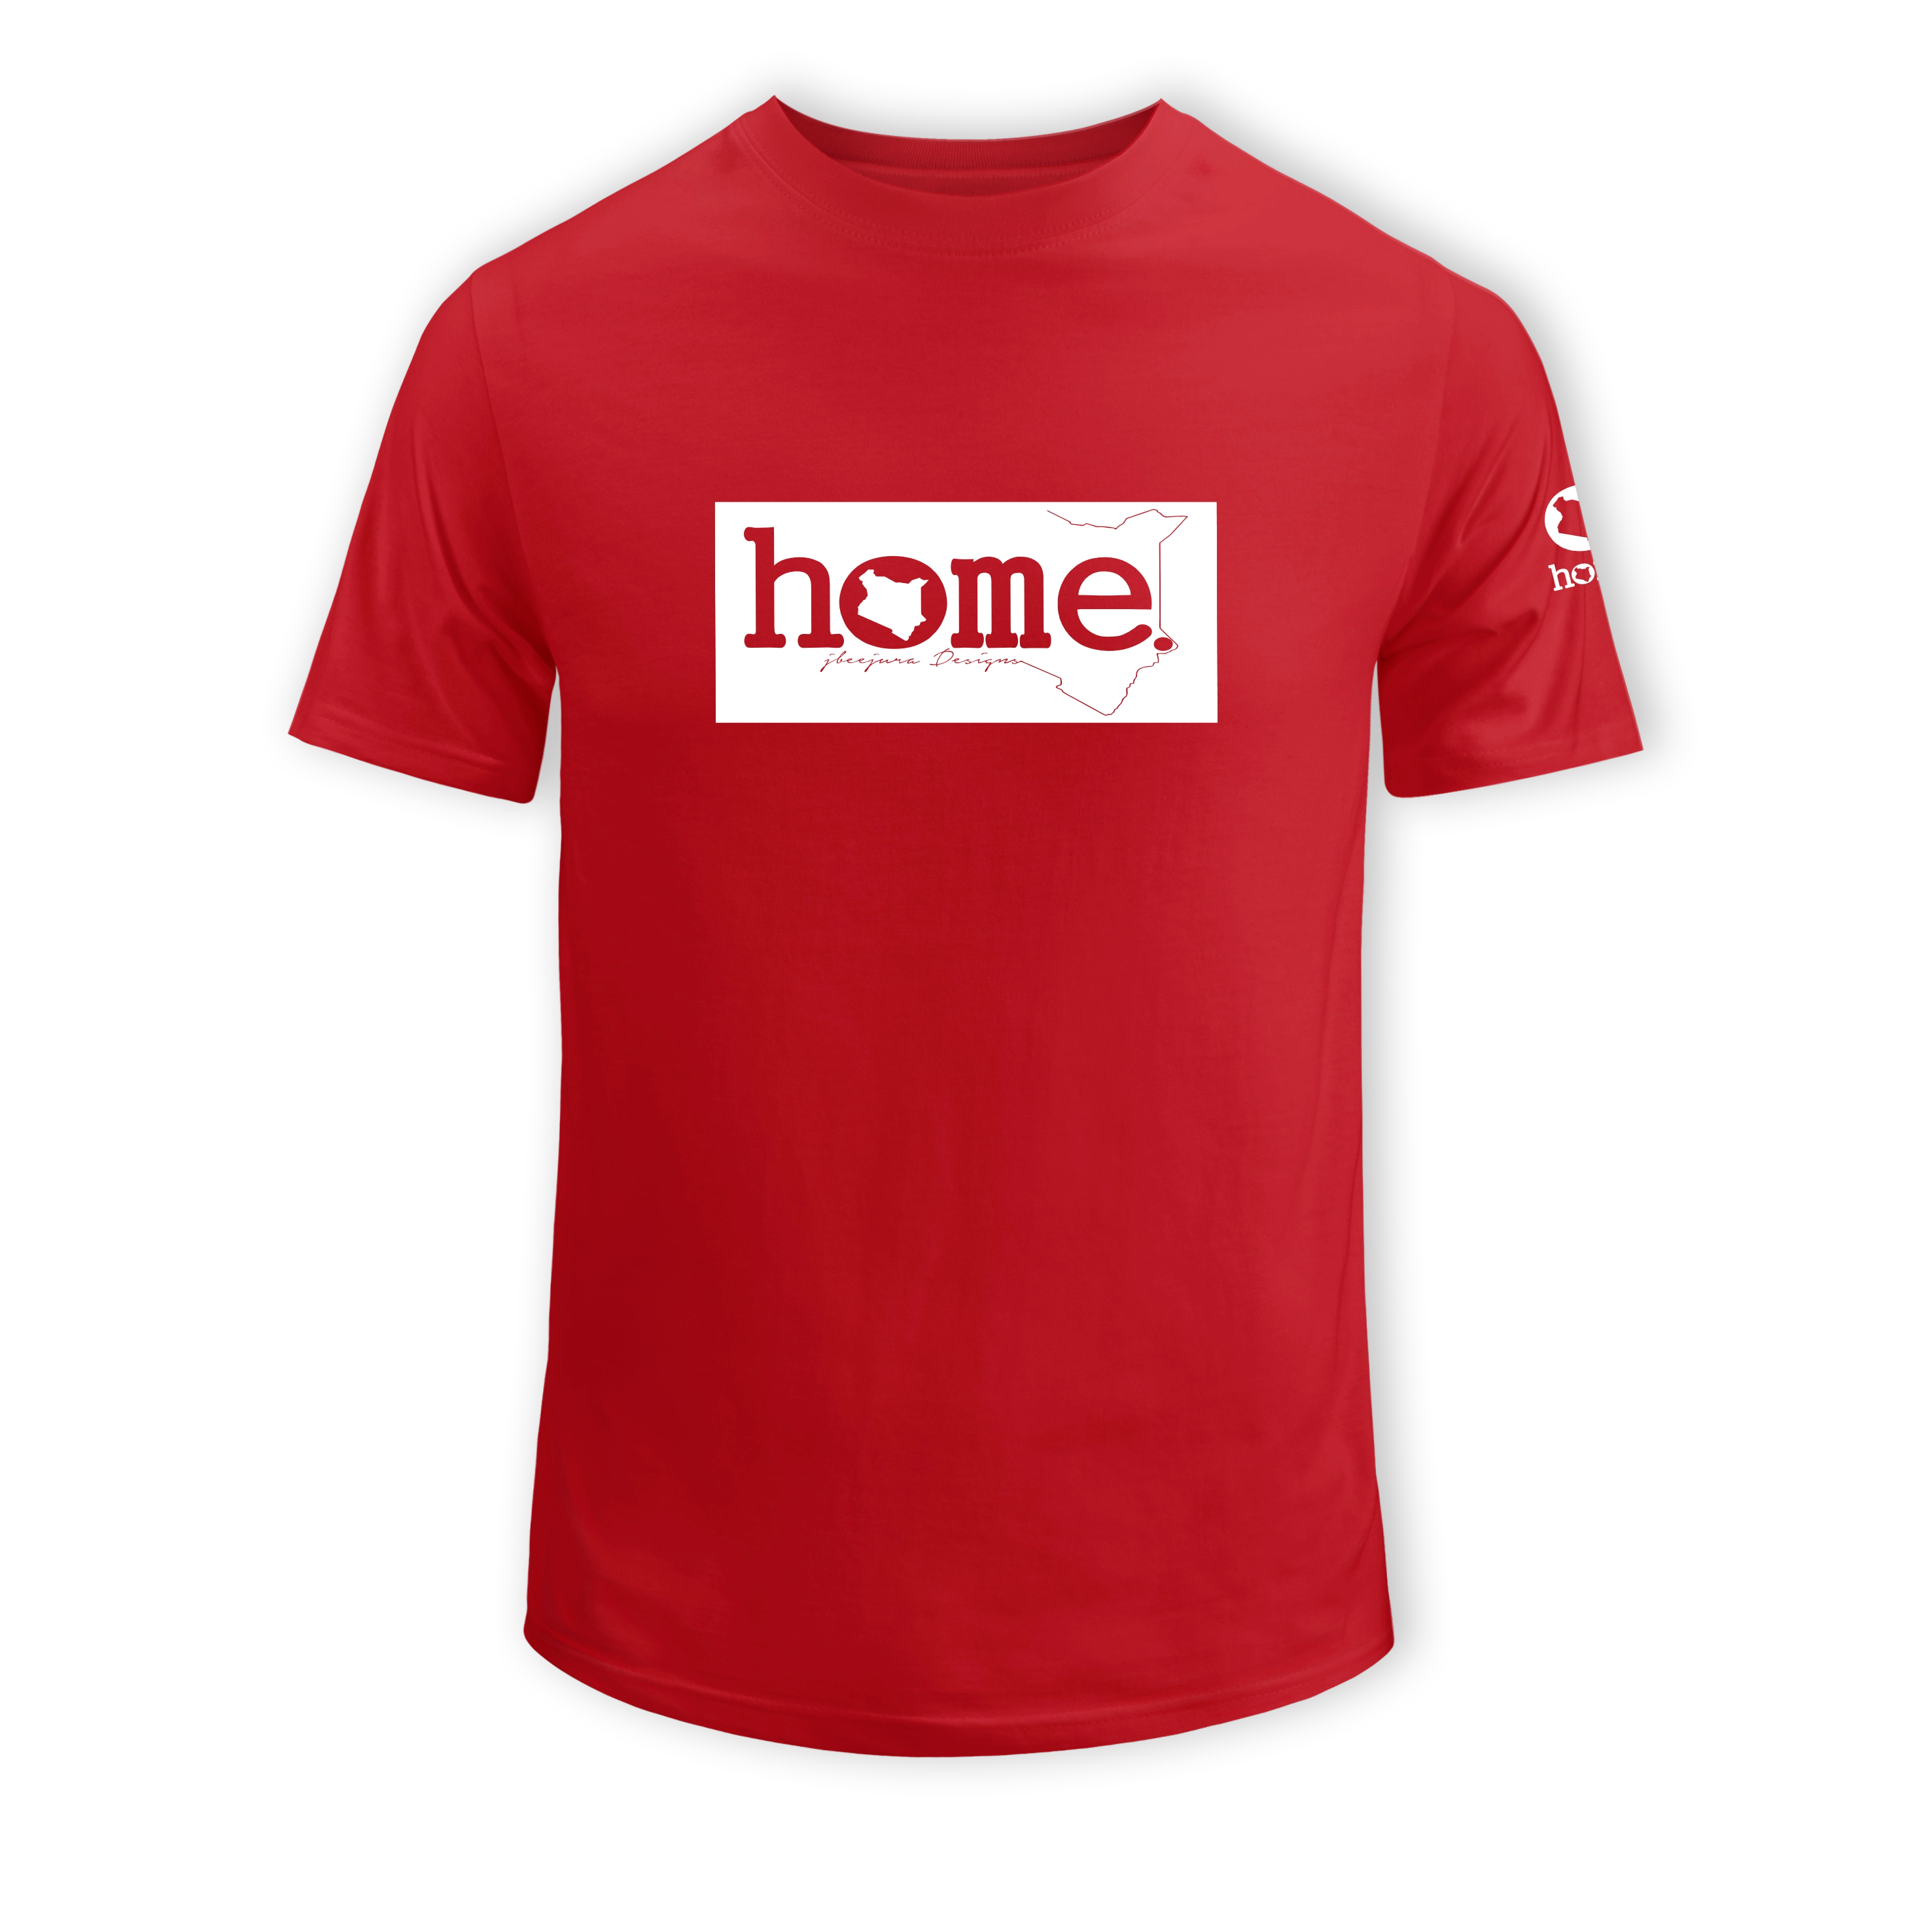 home_254 KIDS SHORT-SLEEVED RED T-SHIRT WITH A WHITE CLASSIC PRINT – COTTON PLUS FABRIC